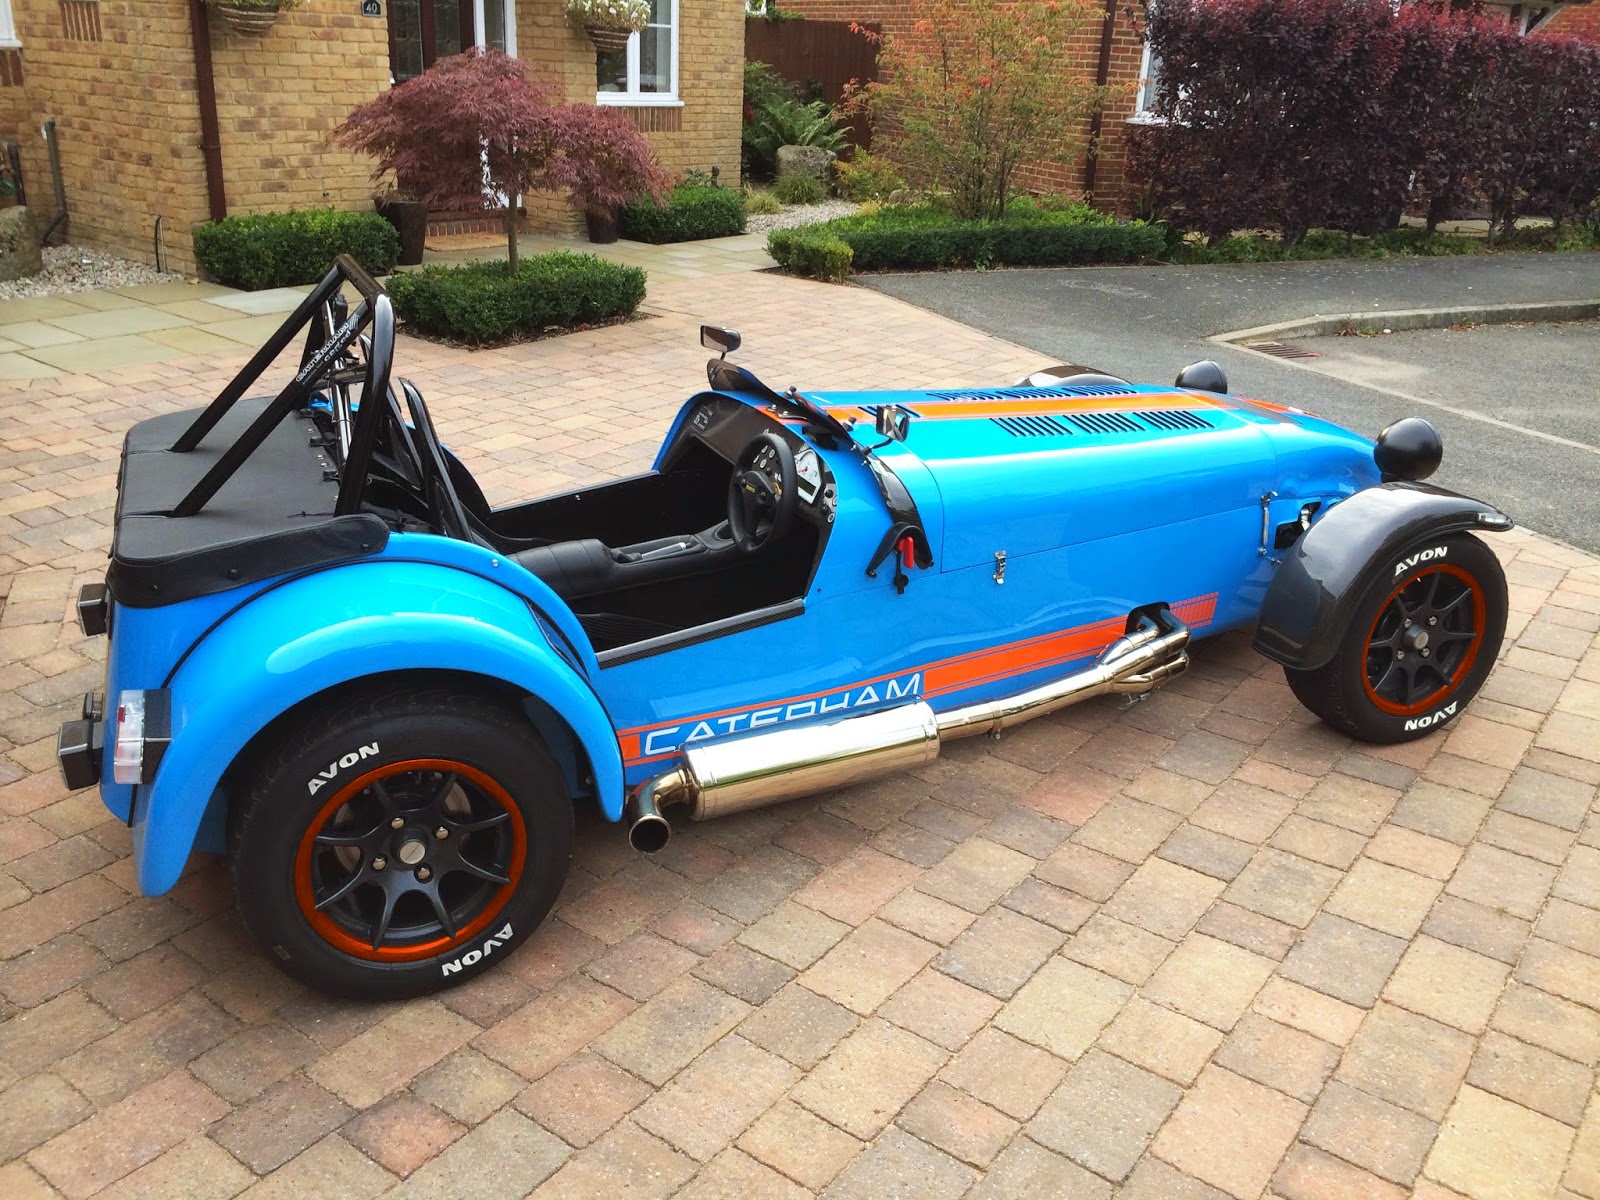 My Caterham R500 with photoshopped wheel and tyre mock-up